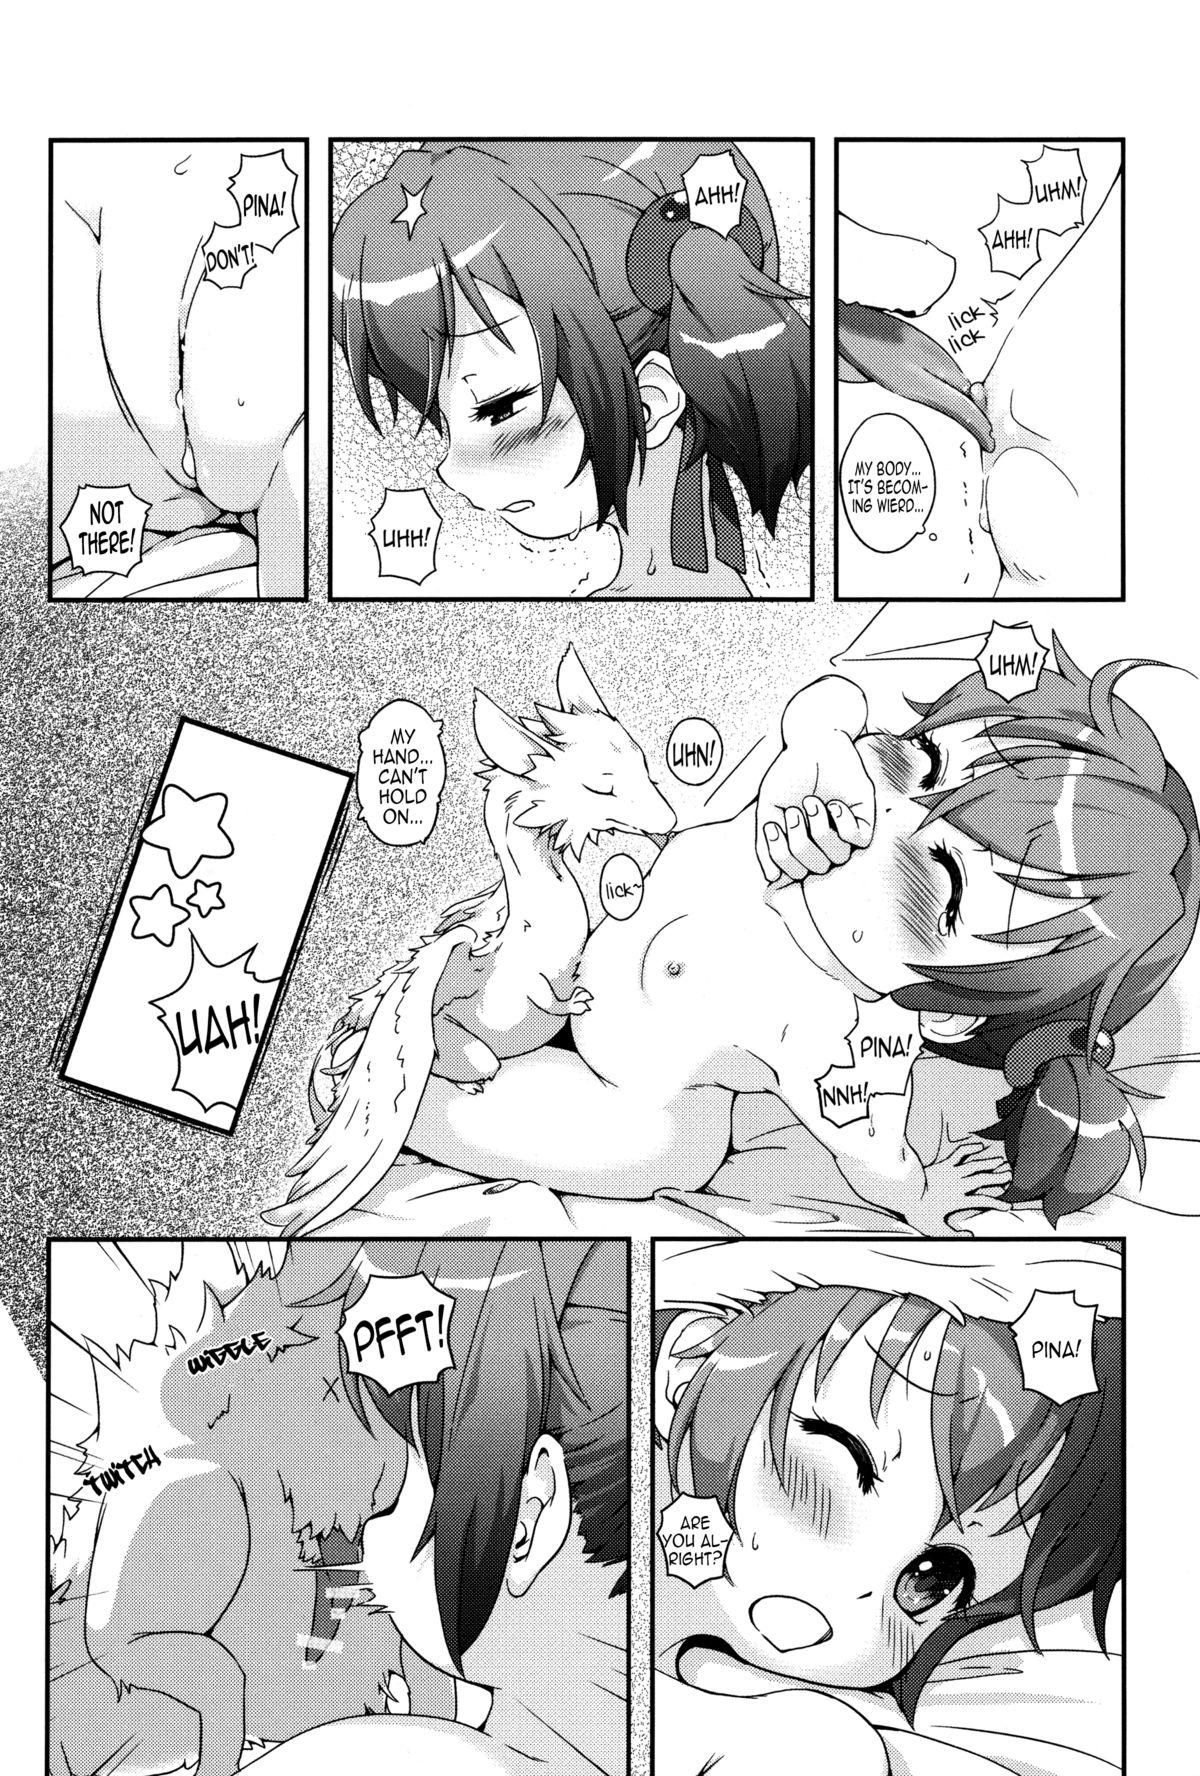 Mask A Beast Tamer's Special Event - Sword art online Hand Job - Page 8